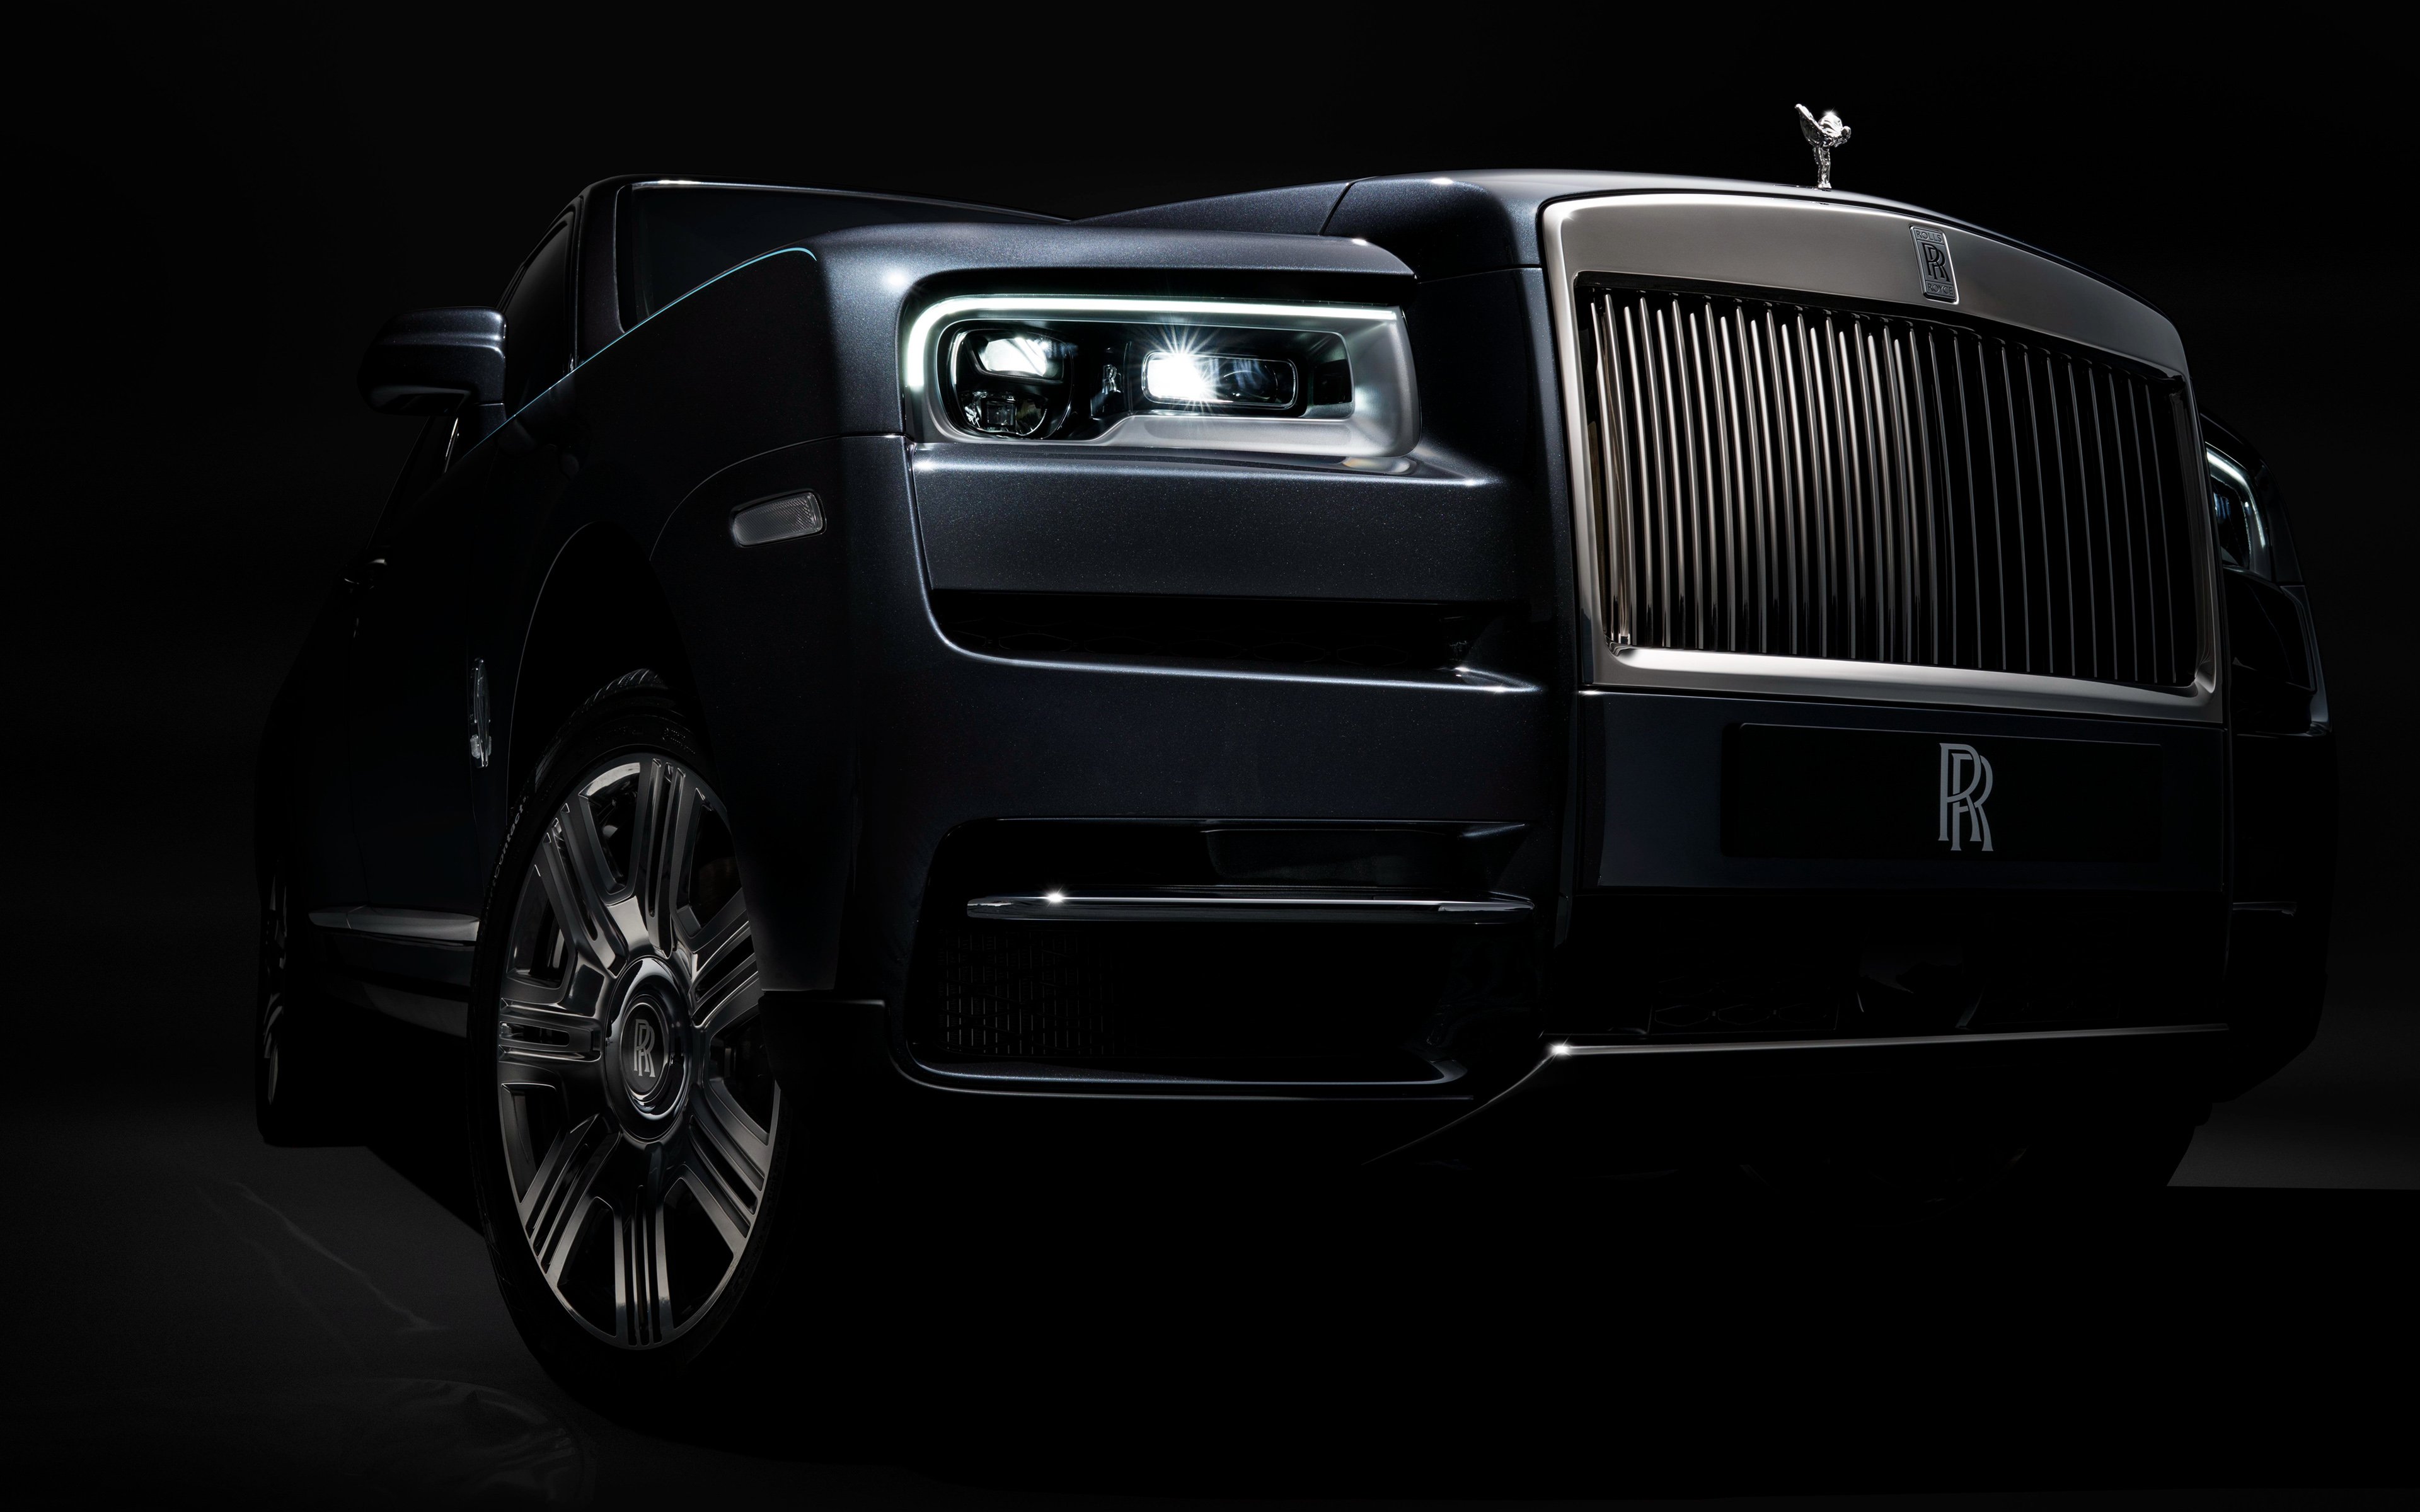 Download Wallpaper 4k, Rolls Royce Cullinan, Darkness, 2018 Cars, Black Cullinan, SUVs, Rolls Royce For Desktop With Resolution 3840x2400. High Quality HD Picture Wallpaper